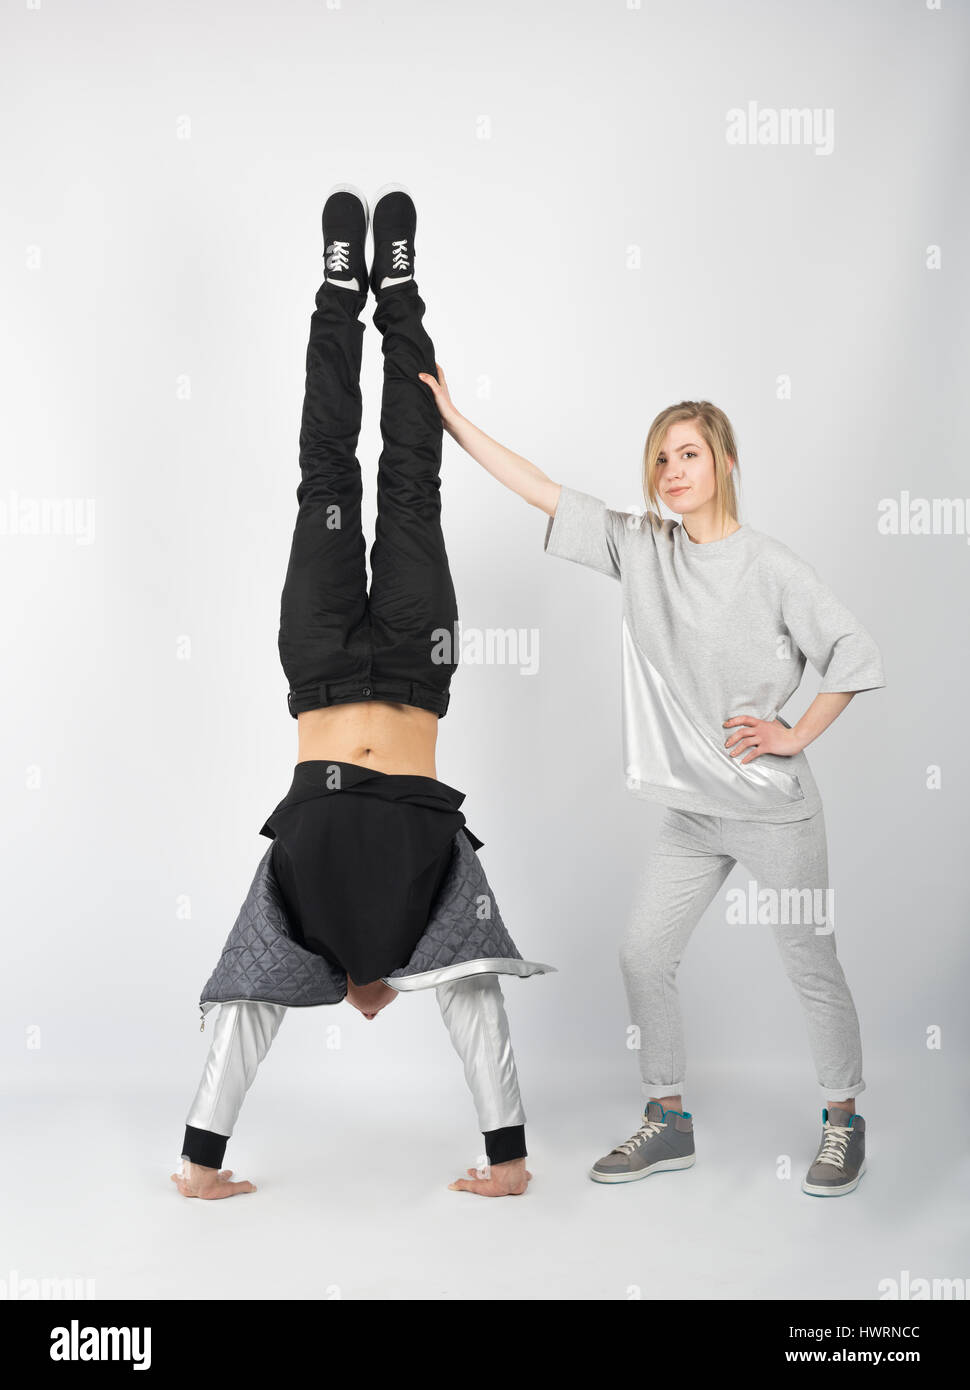 Cheerful couple having fun posing in studio. He stands on his hands and she arched her body and lifted her leg upward. Stock Photo